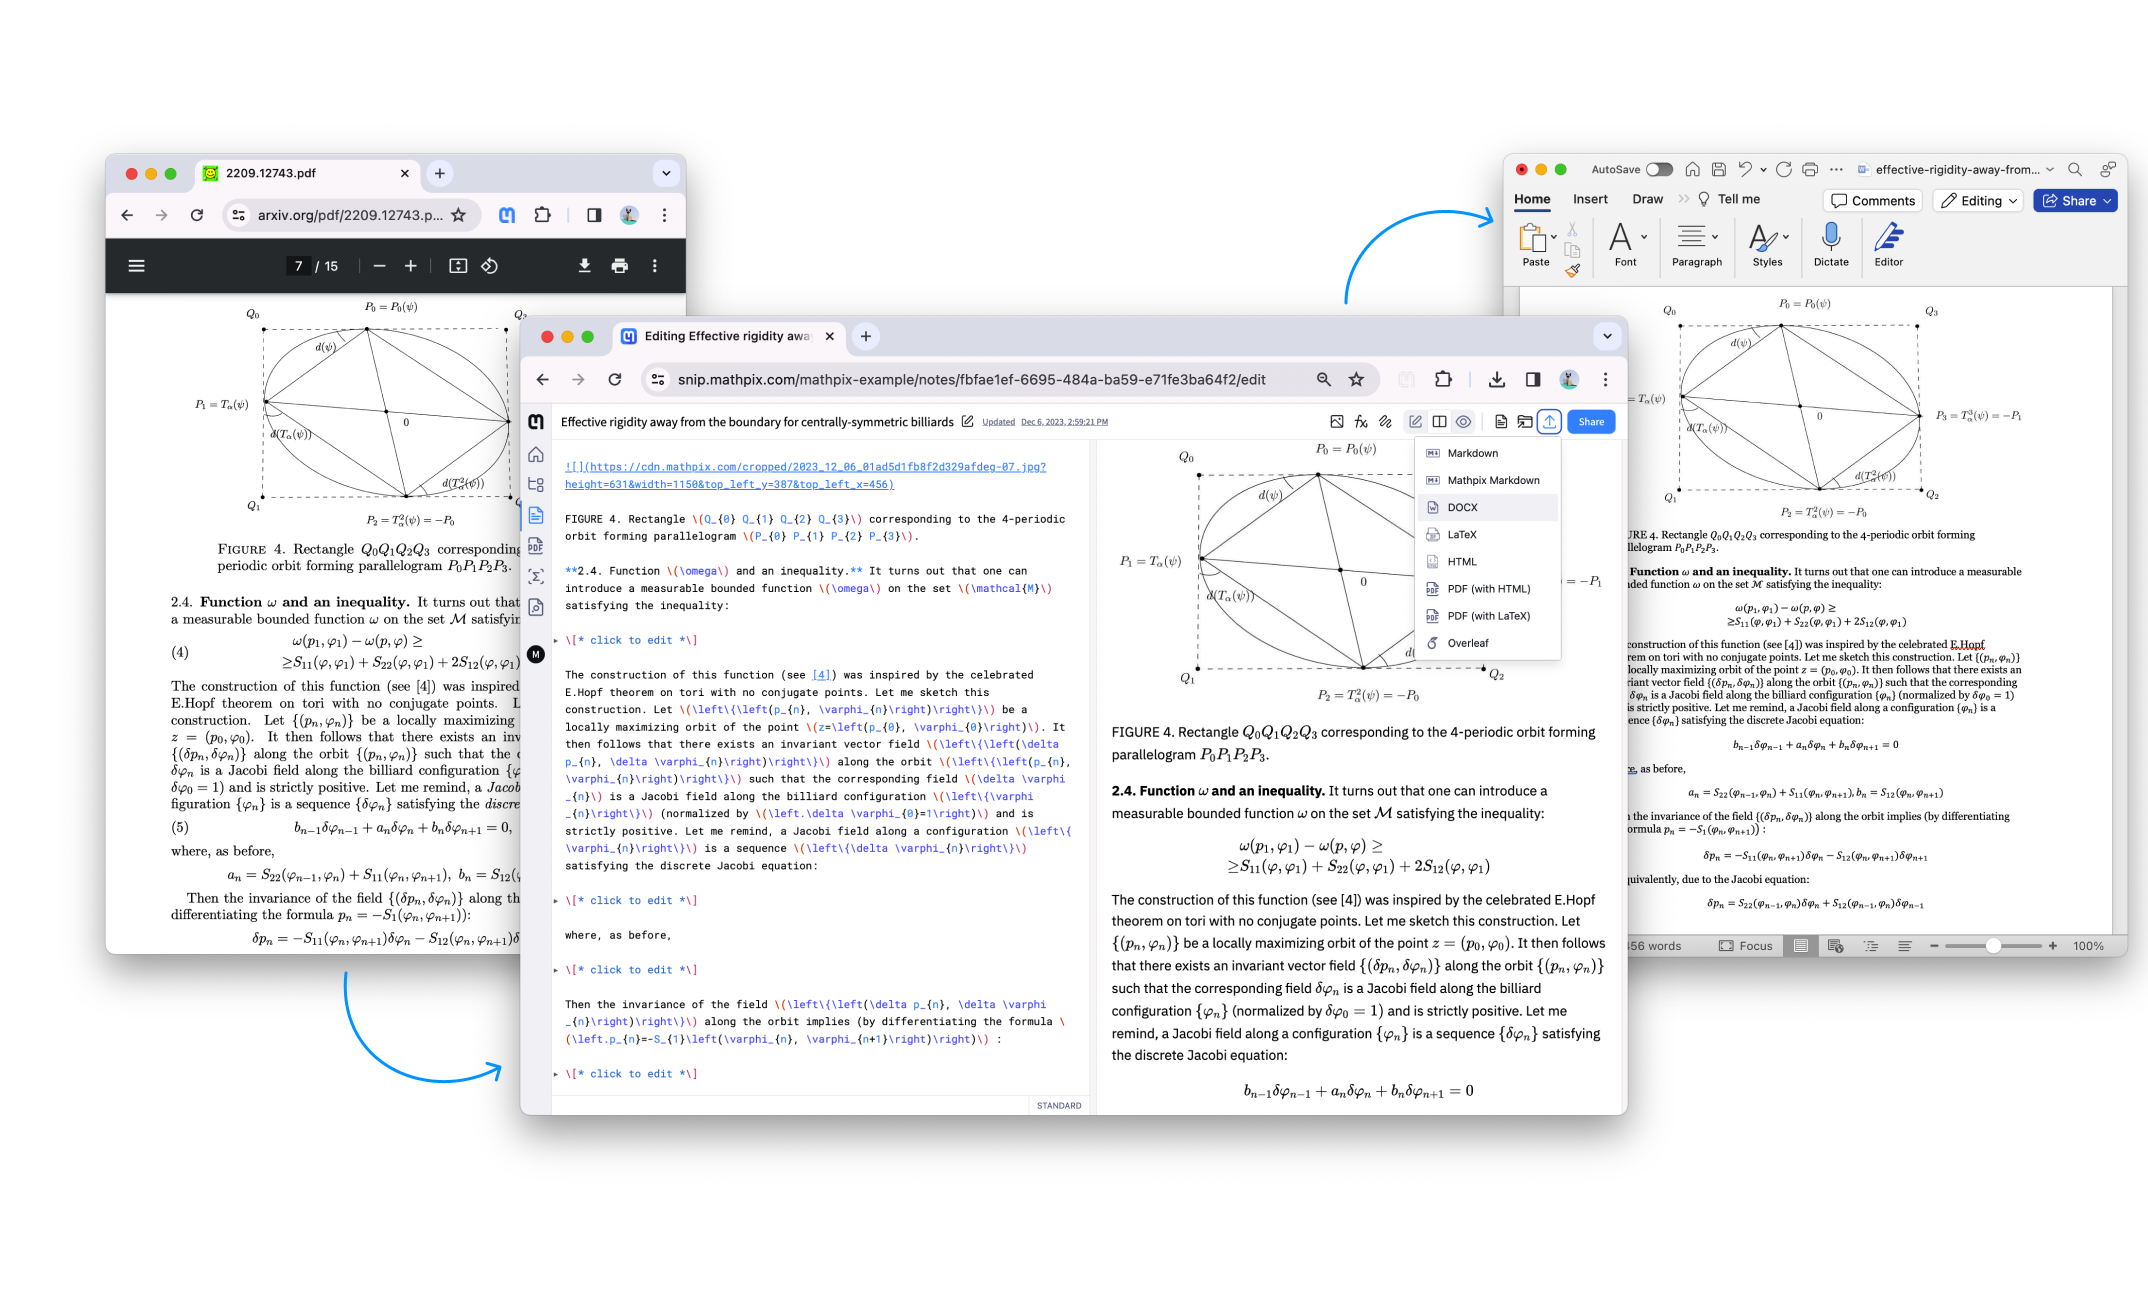 Convert images to LaTeX, DOCX, and more.